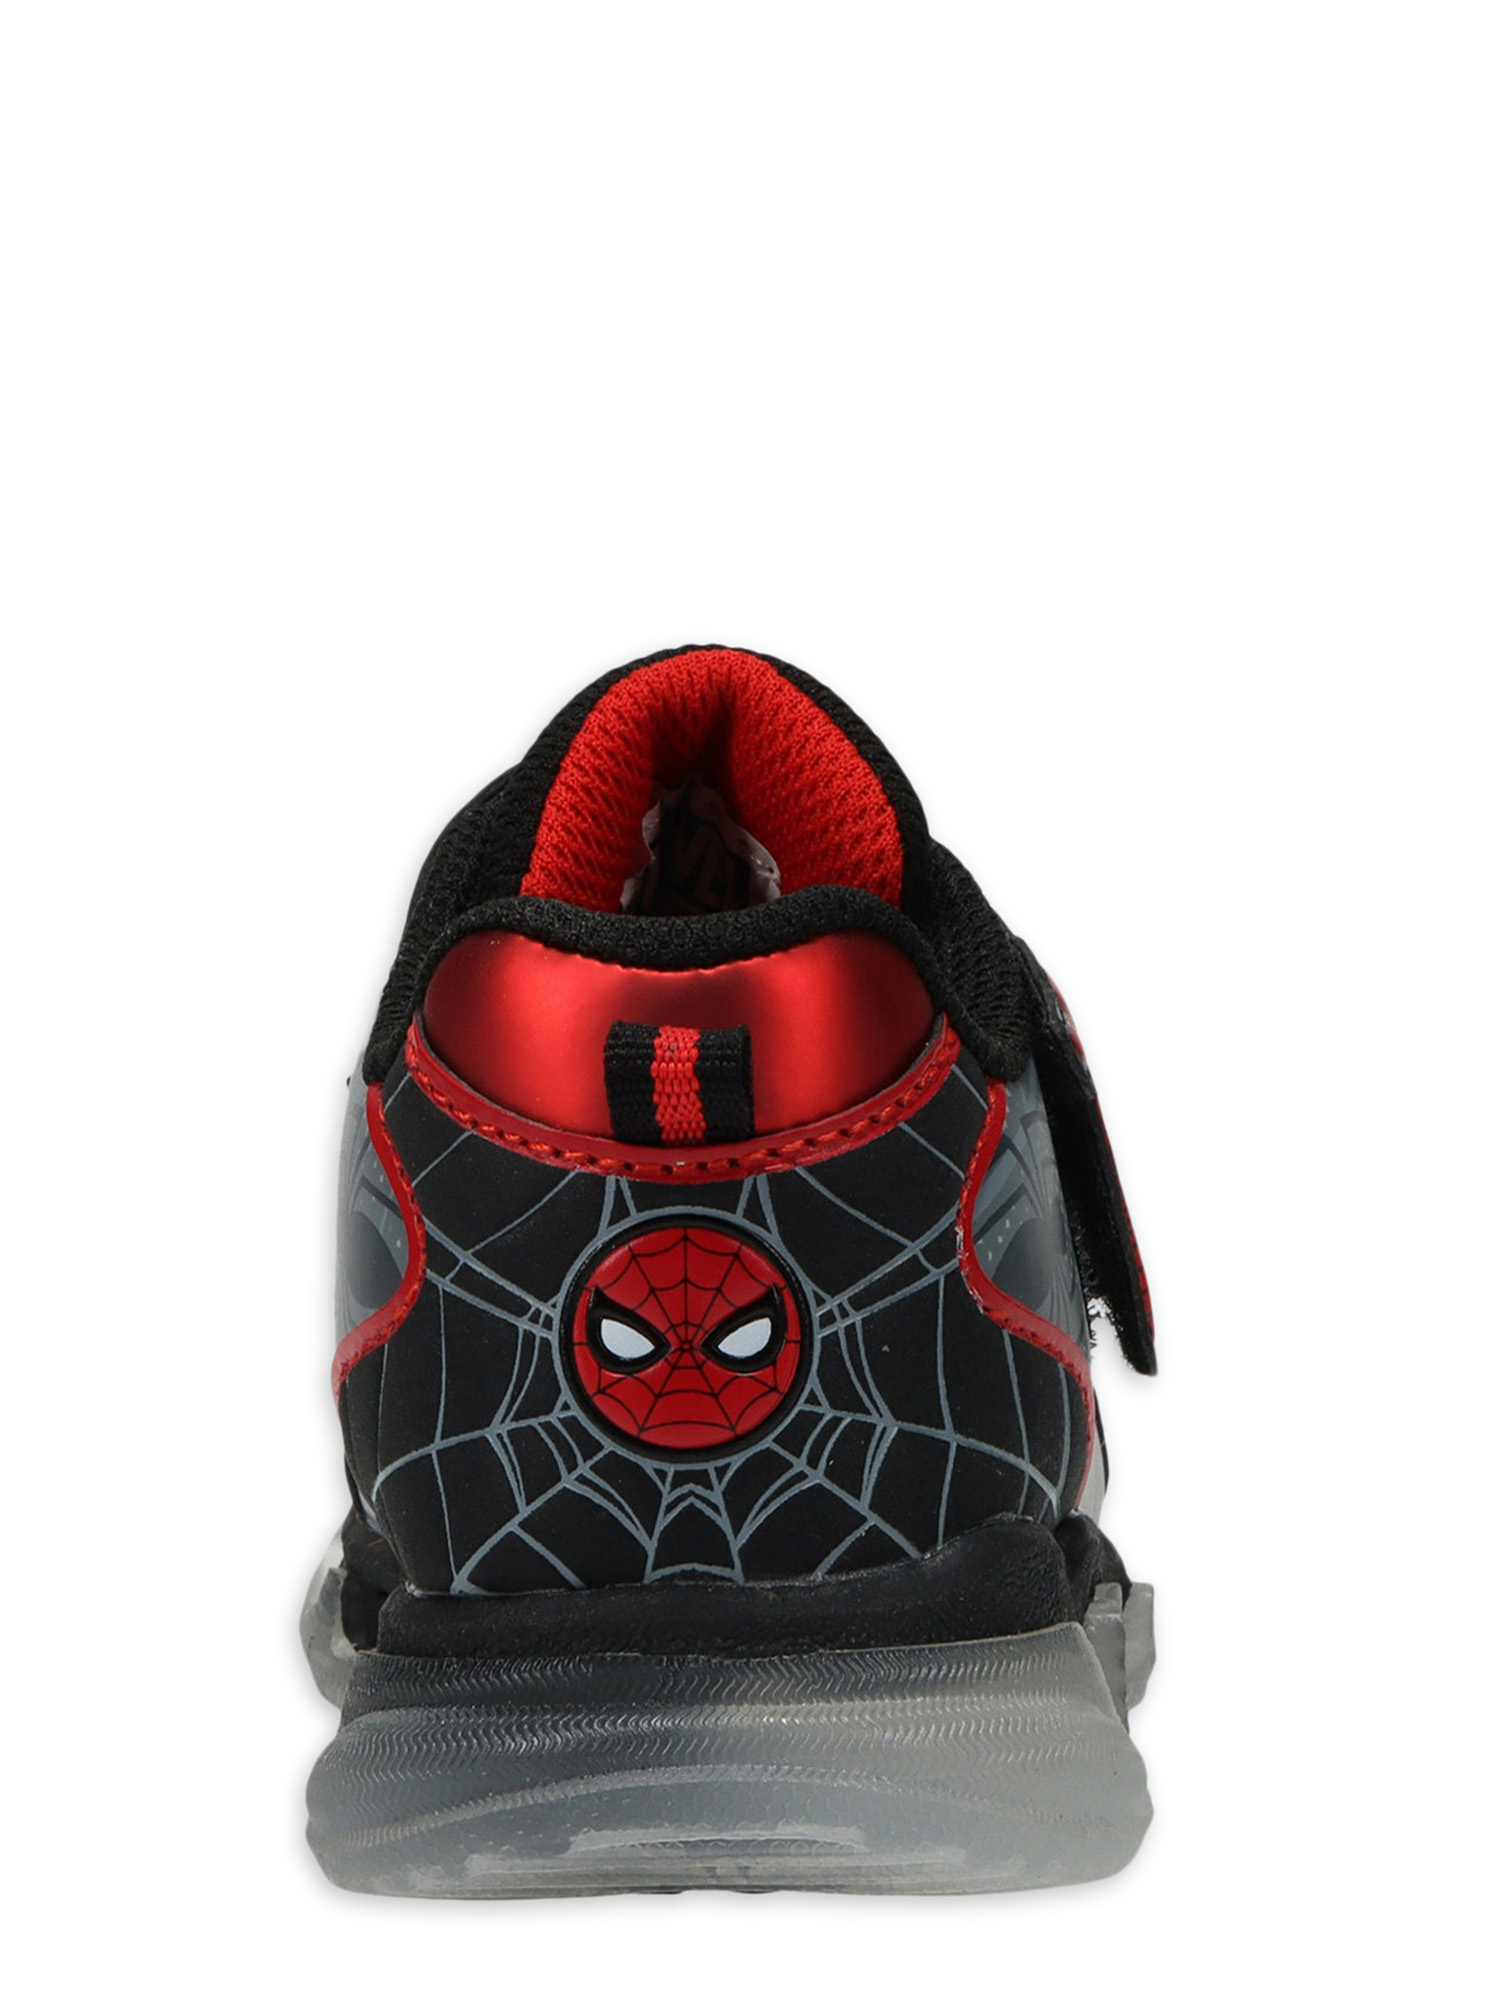 Spider-Man by Marvel Boys Toddler Athletic Light-up Silver Sneaker ...